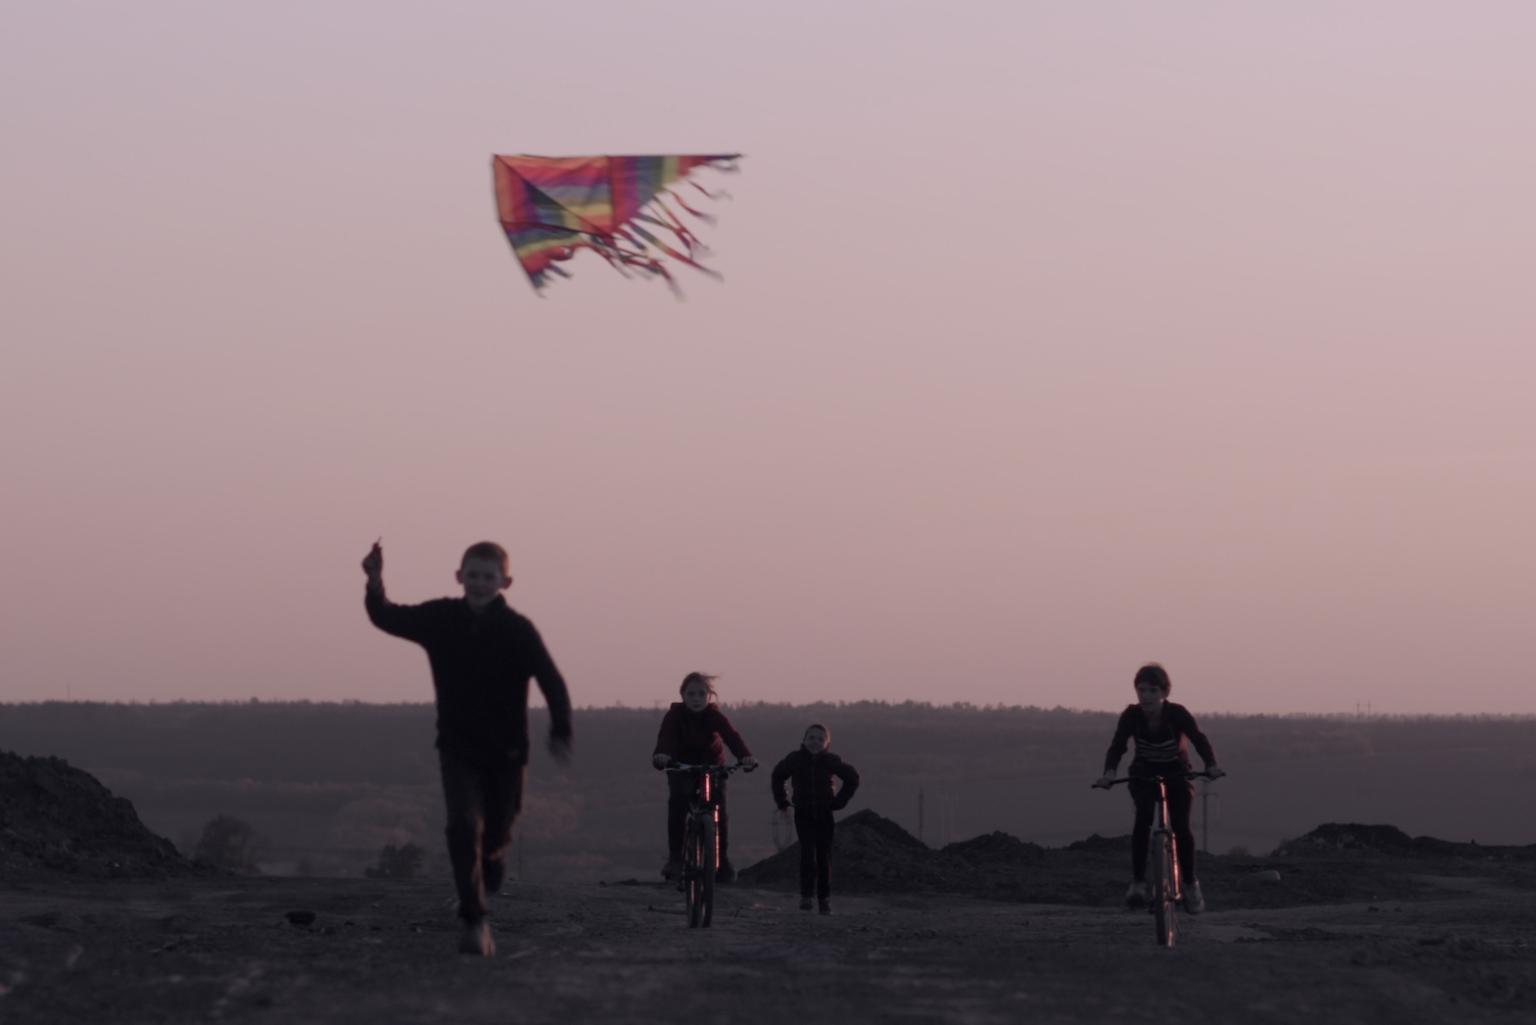 A wide area or street at dusk: four children move towards the camera. Two are running, two are riding their bicycles. Above them flies a kite, which the child on the far left holds by the string.